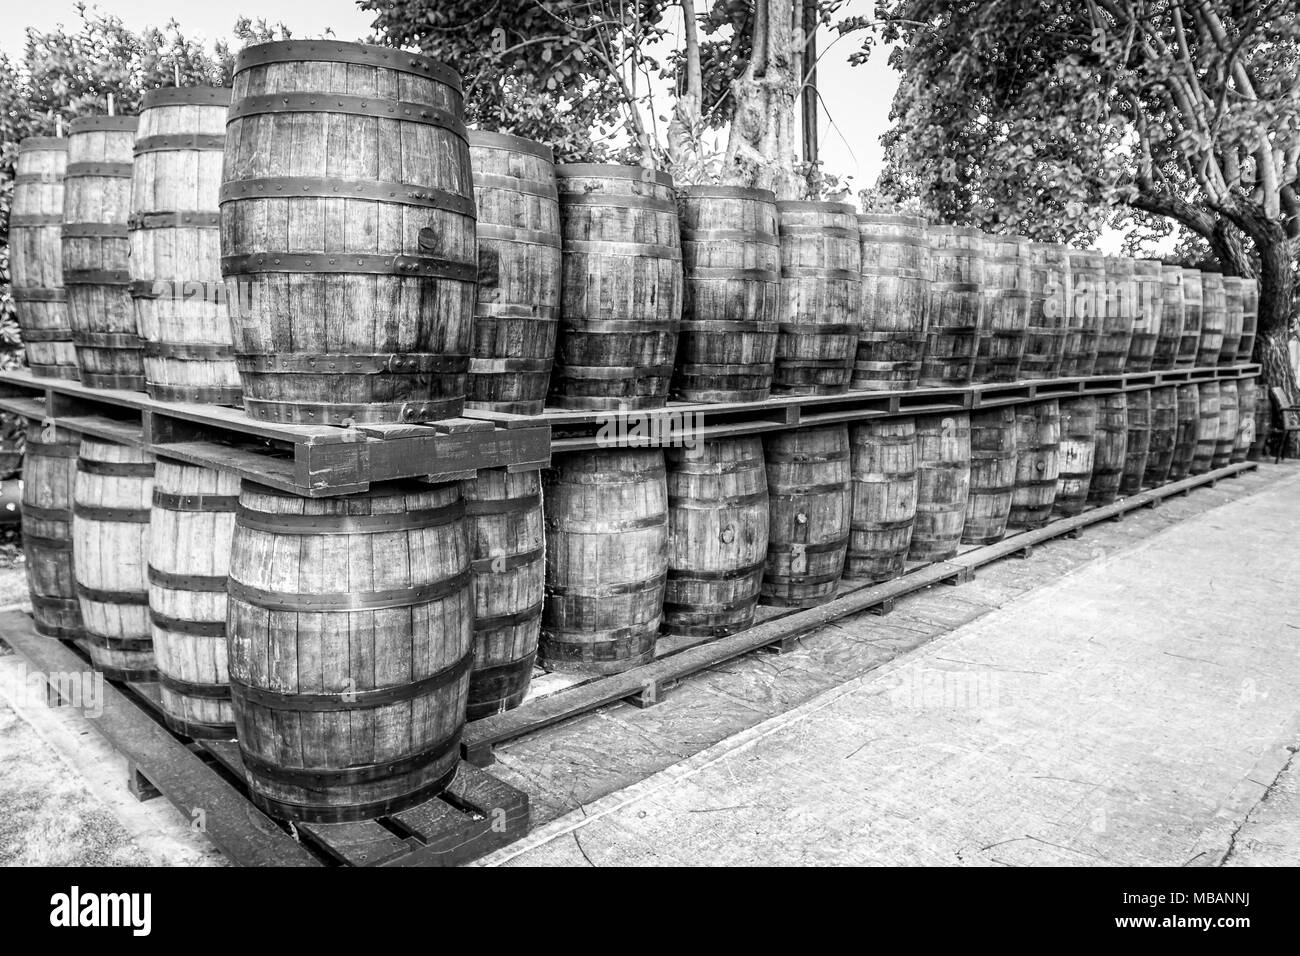 Rum barrels stacked on the premises of a rum distillery. Stock Photo